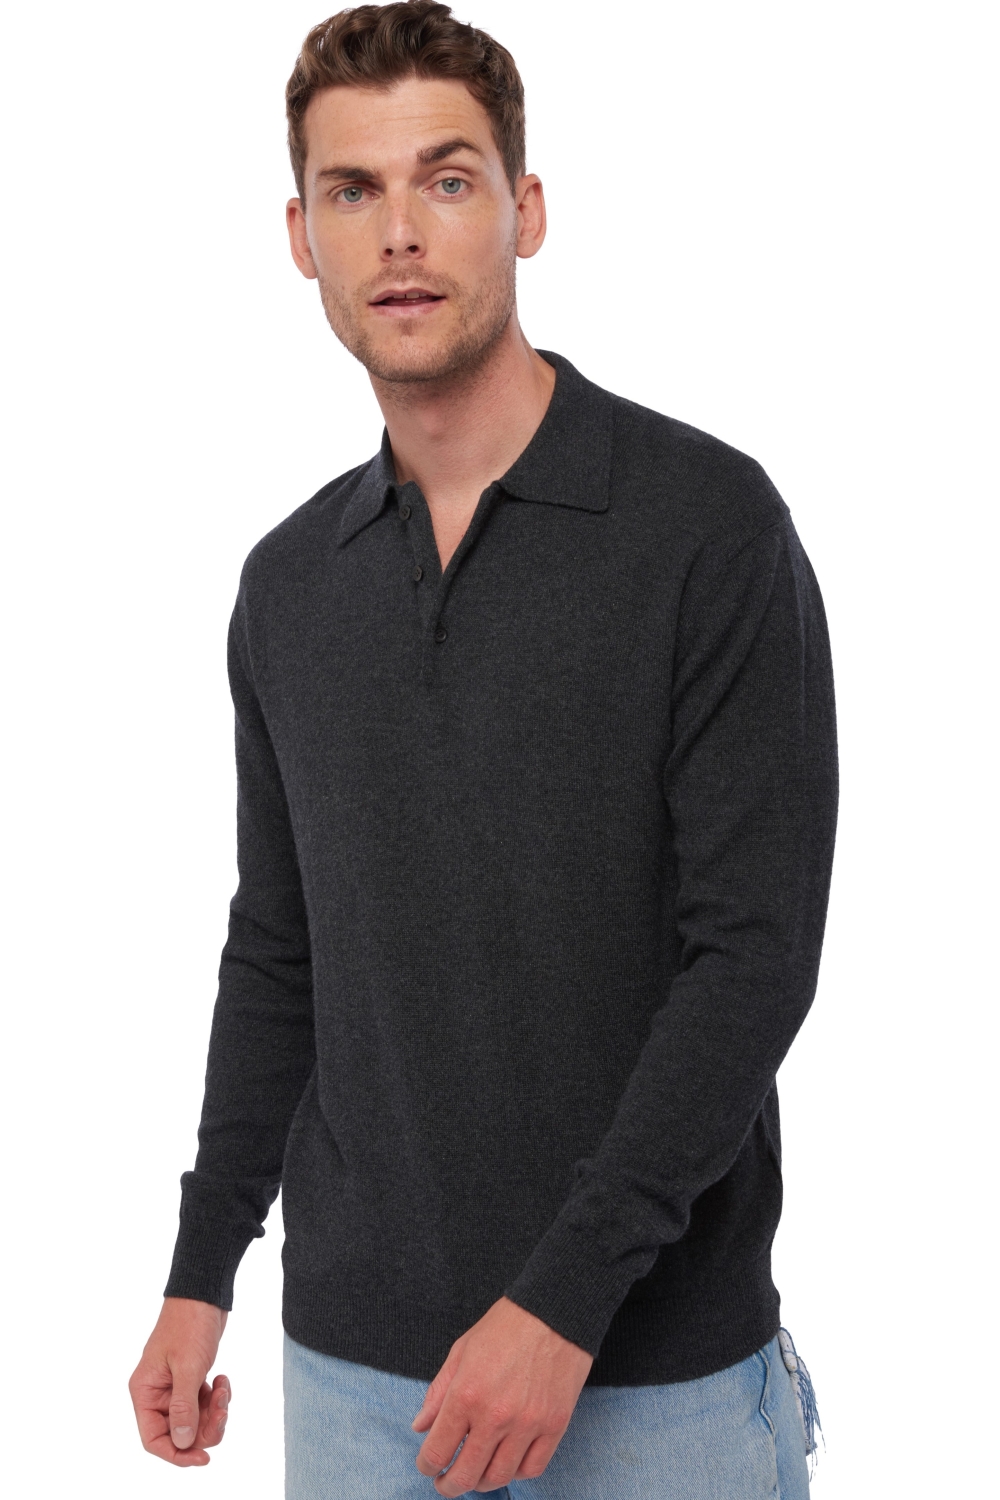 Cachemire pull homme alexandre anthracite chine 3xl